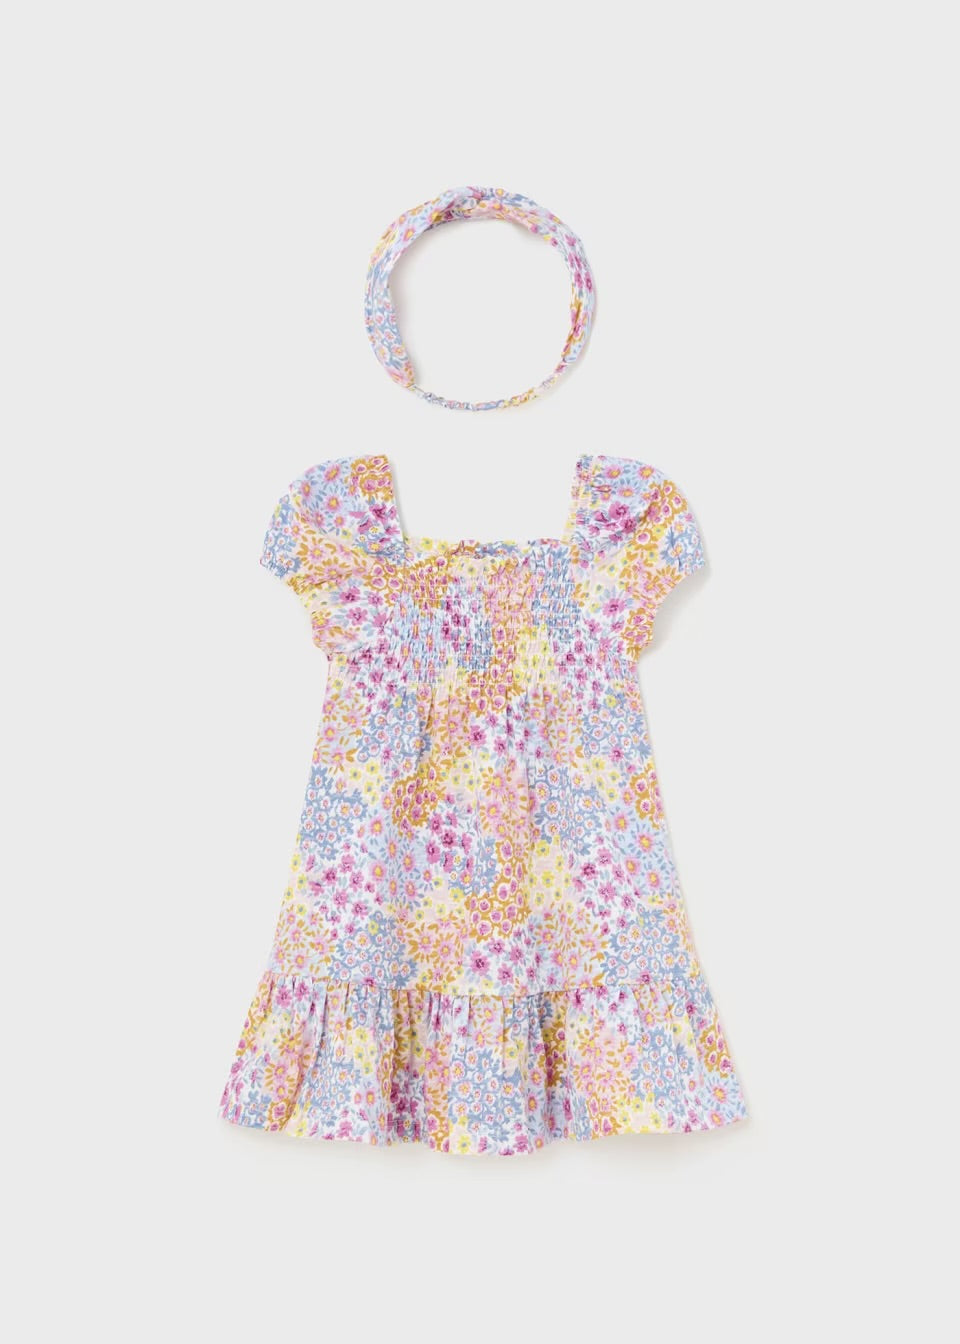 Floral Dress with Headband